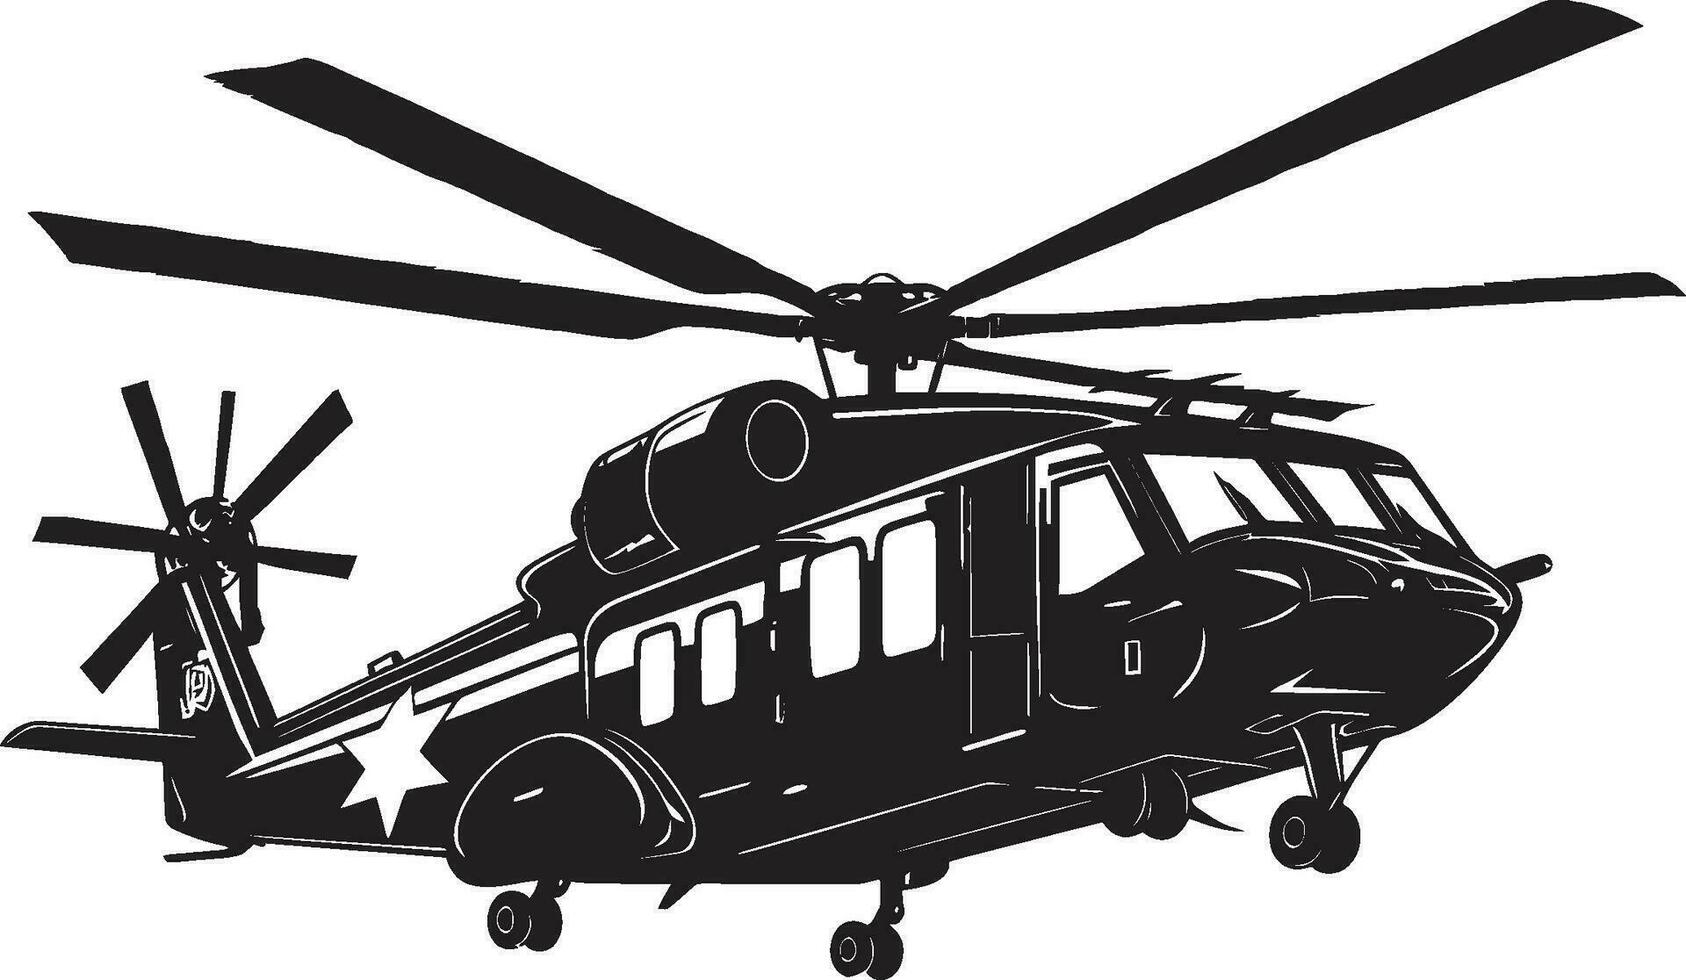 Combat Copter Army Helicopter Vector Icon Tactical Rotorcraft Black Emblematic Design